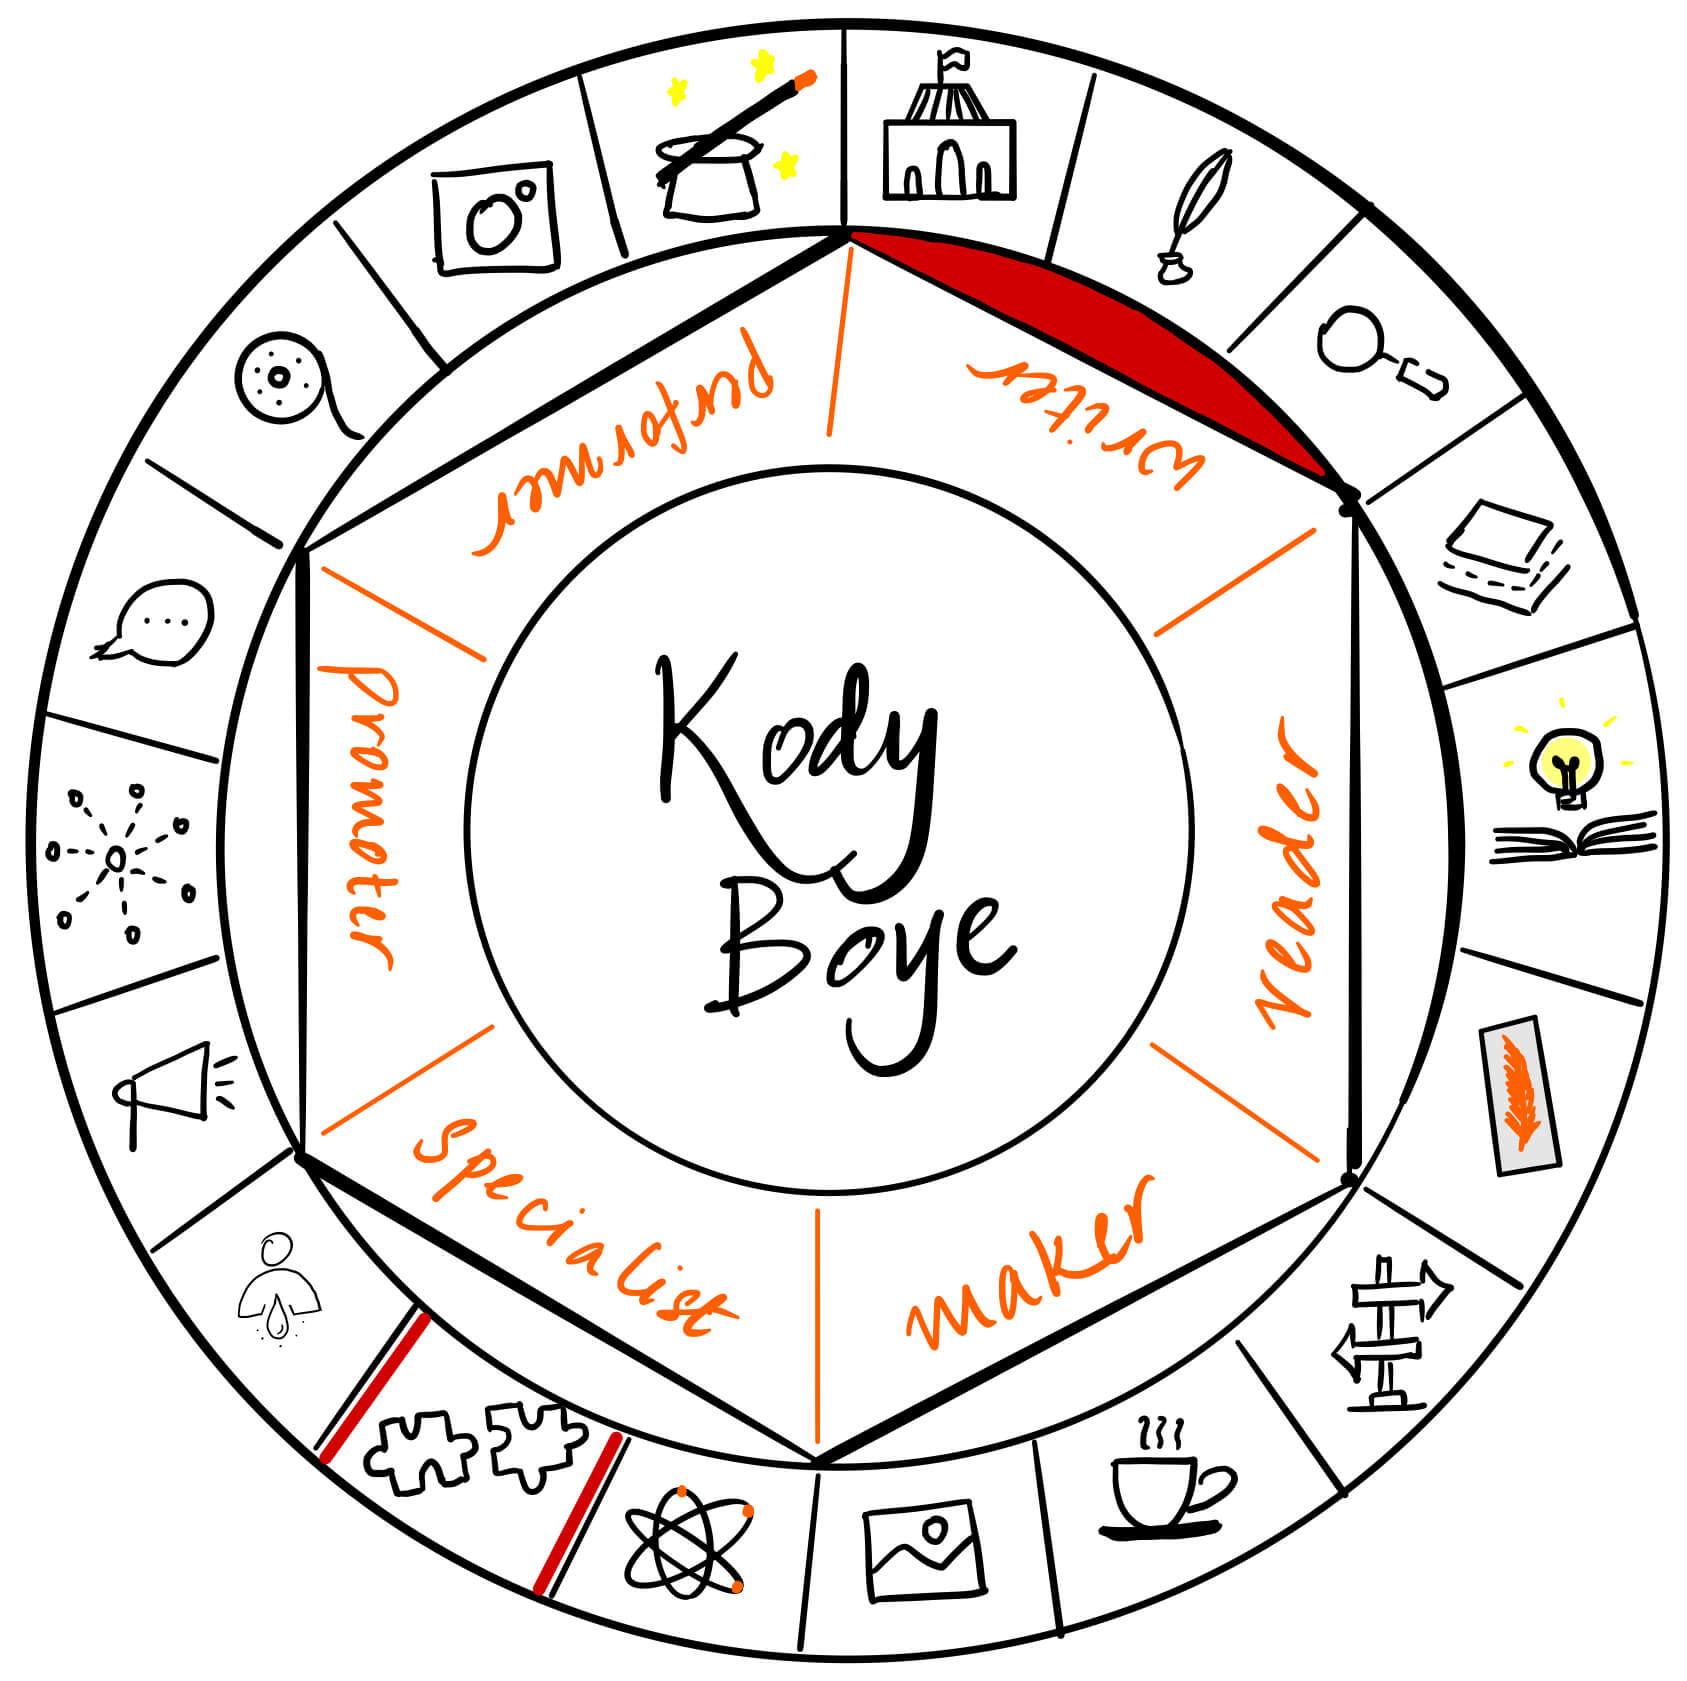 Kody Boye is a writer. It's a pleasure to have him over on The Creator's Roulette to talk about writing with chronic illness.